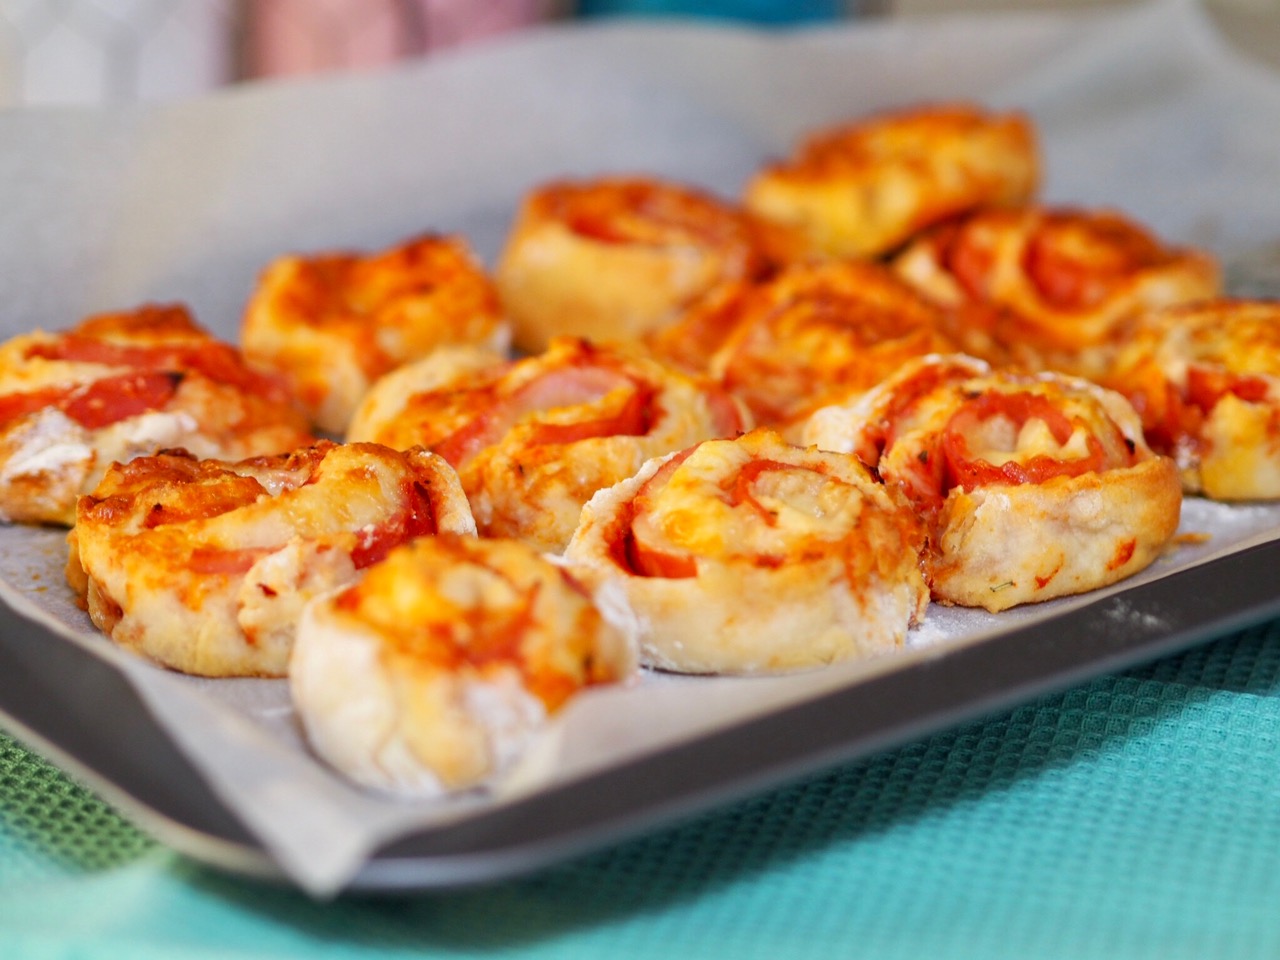 5 Ingredient Ham and Cheese Lunchbox Scrolls